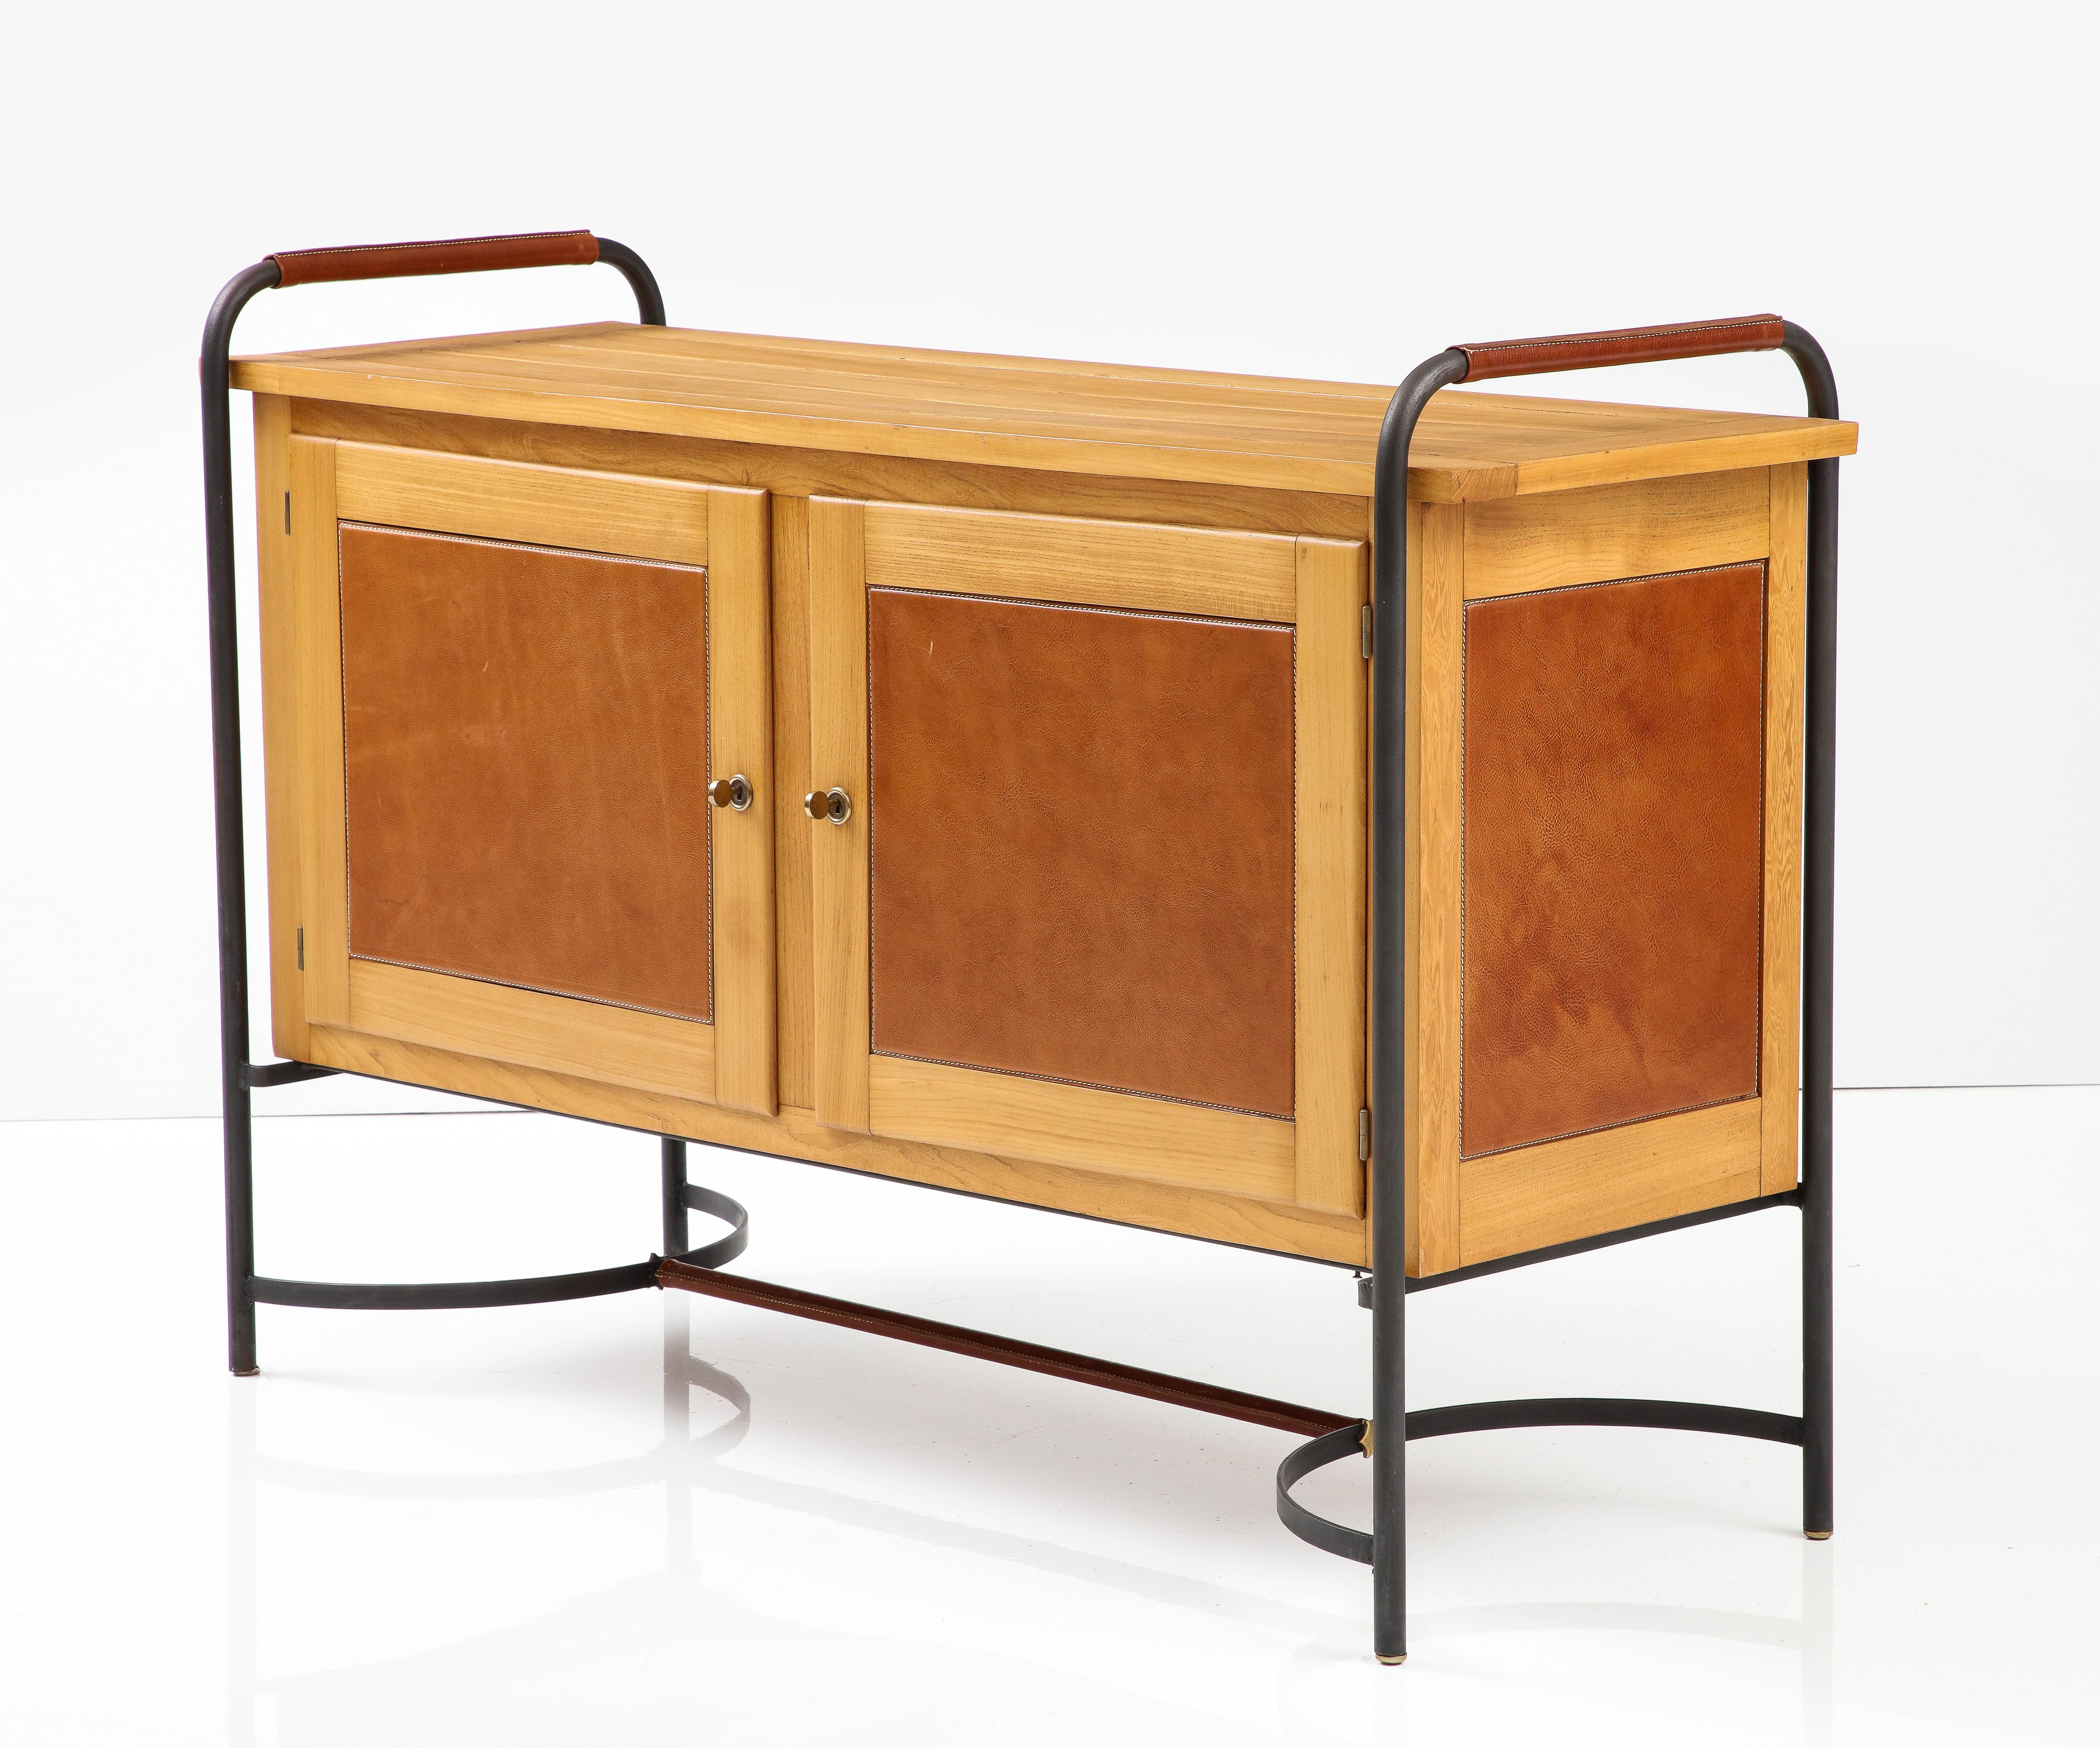 Mid-20th Century Rare Equestrian-Style Cabinet by Jacques Adnet, France, c. 1950s